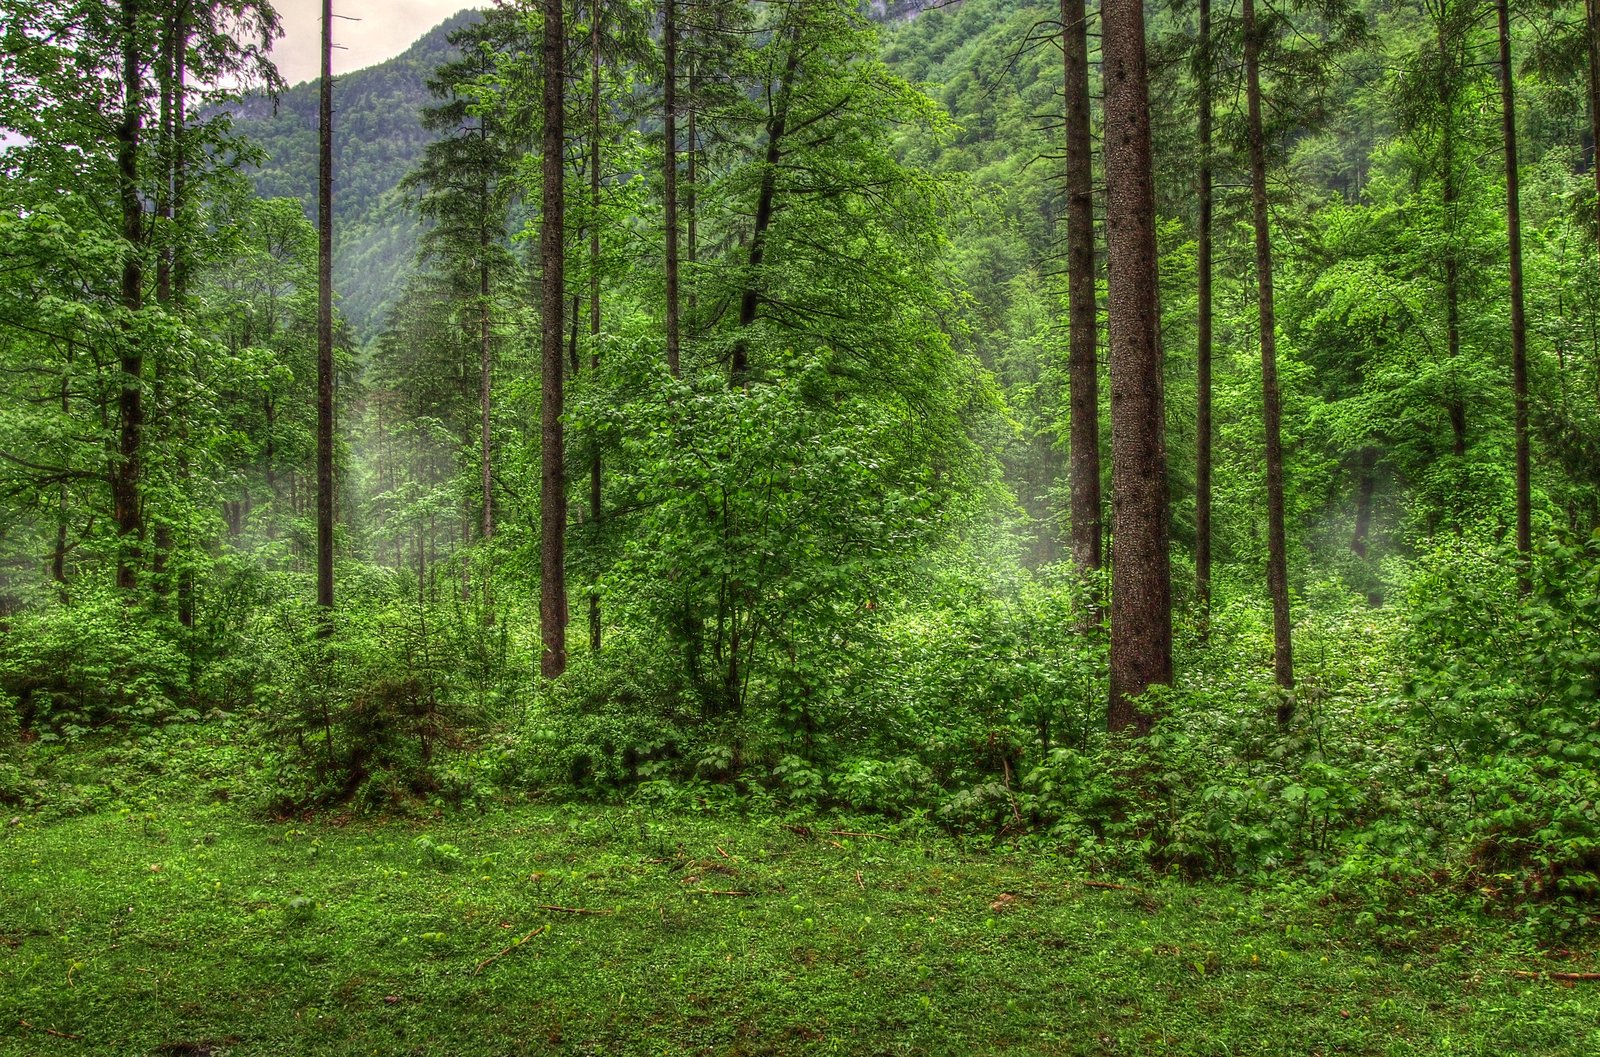 Rainy Forest Background by AustriaAngloAlliance on